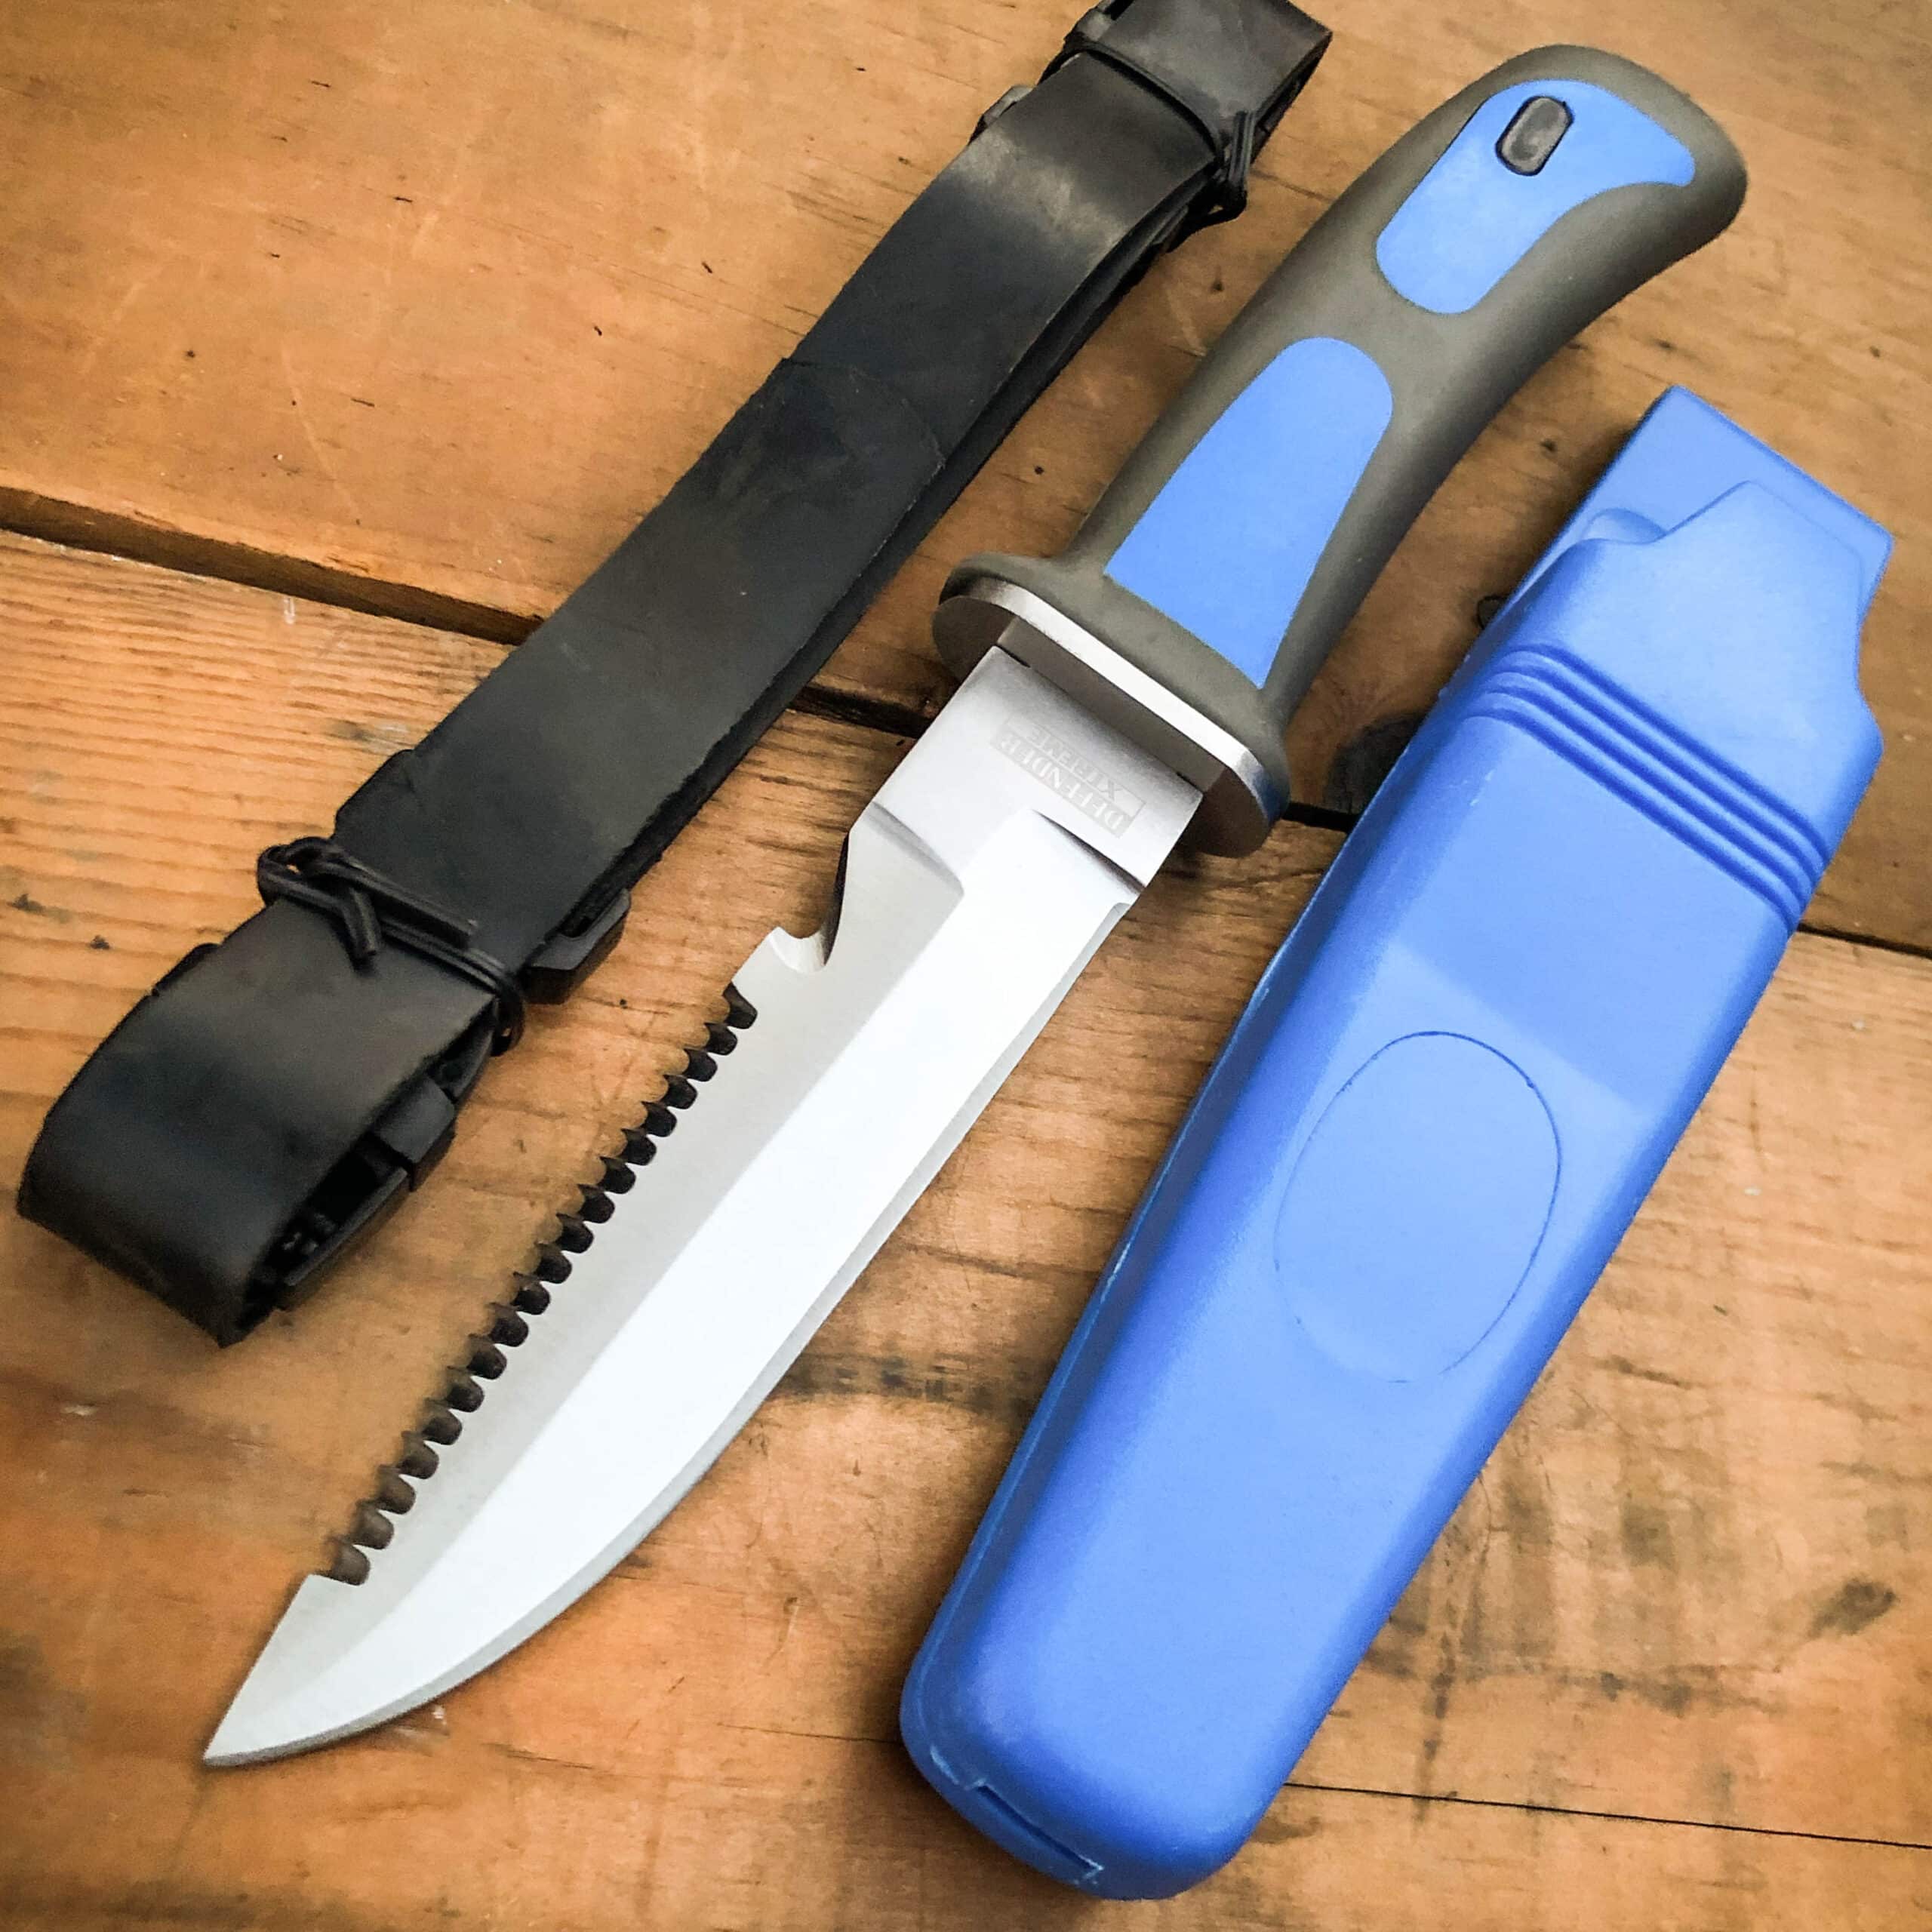 Scuba Diving Knife Fixed Blade Sheath Dive Leg + Arm Straps Stainless Steel Blue